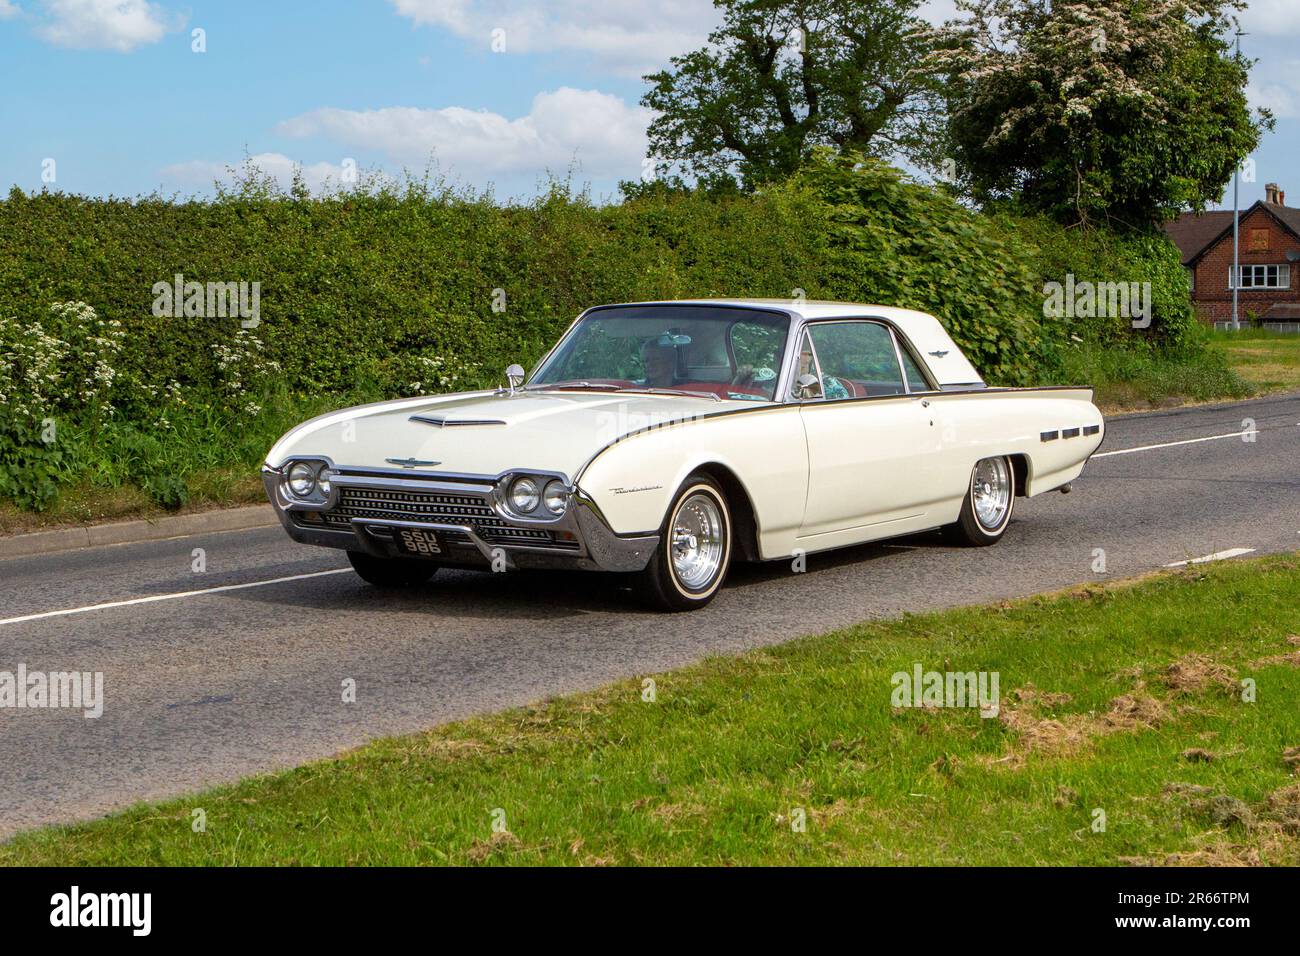 1962 White Ford Thunderbird 2-door Convertible. Classic vintage car, Yesteryear motors en route to Capesthorne Hall Vintage Collectors car show, UK Stock Photo